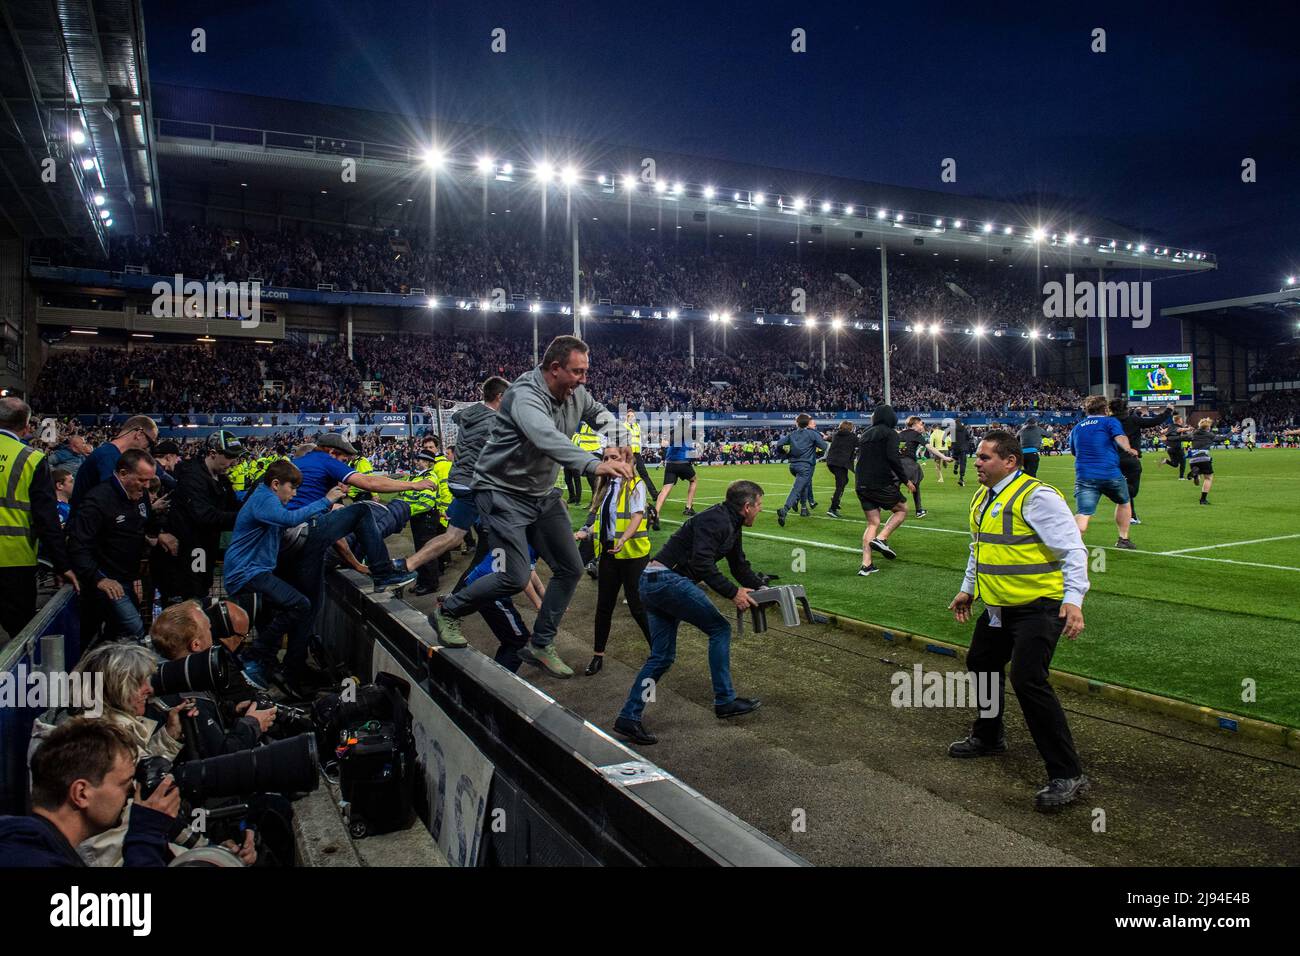 LIVERPOOL, ENGLAND - MAY 19: Everton fans run on pitch during the Premier League match between Everton and Crystal Palace at Goodison Park on May 19, 2022 in Liverpool, United Kingdom. (Photo by Sebastian Frej) Stock Photo